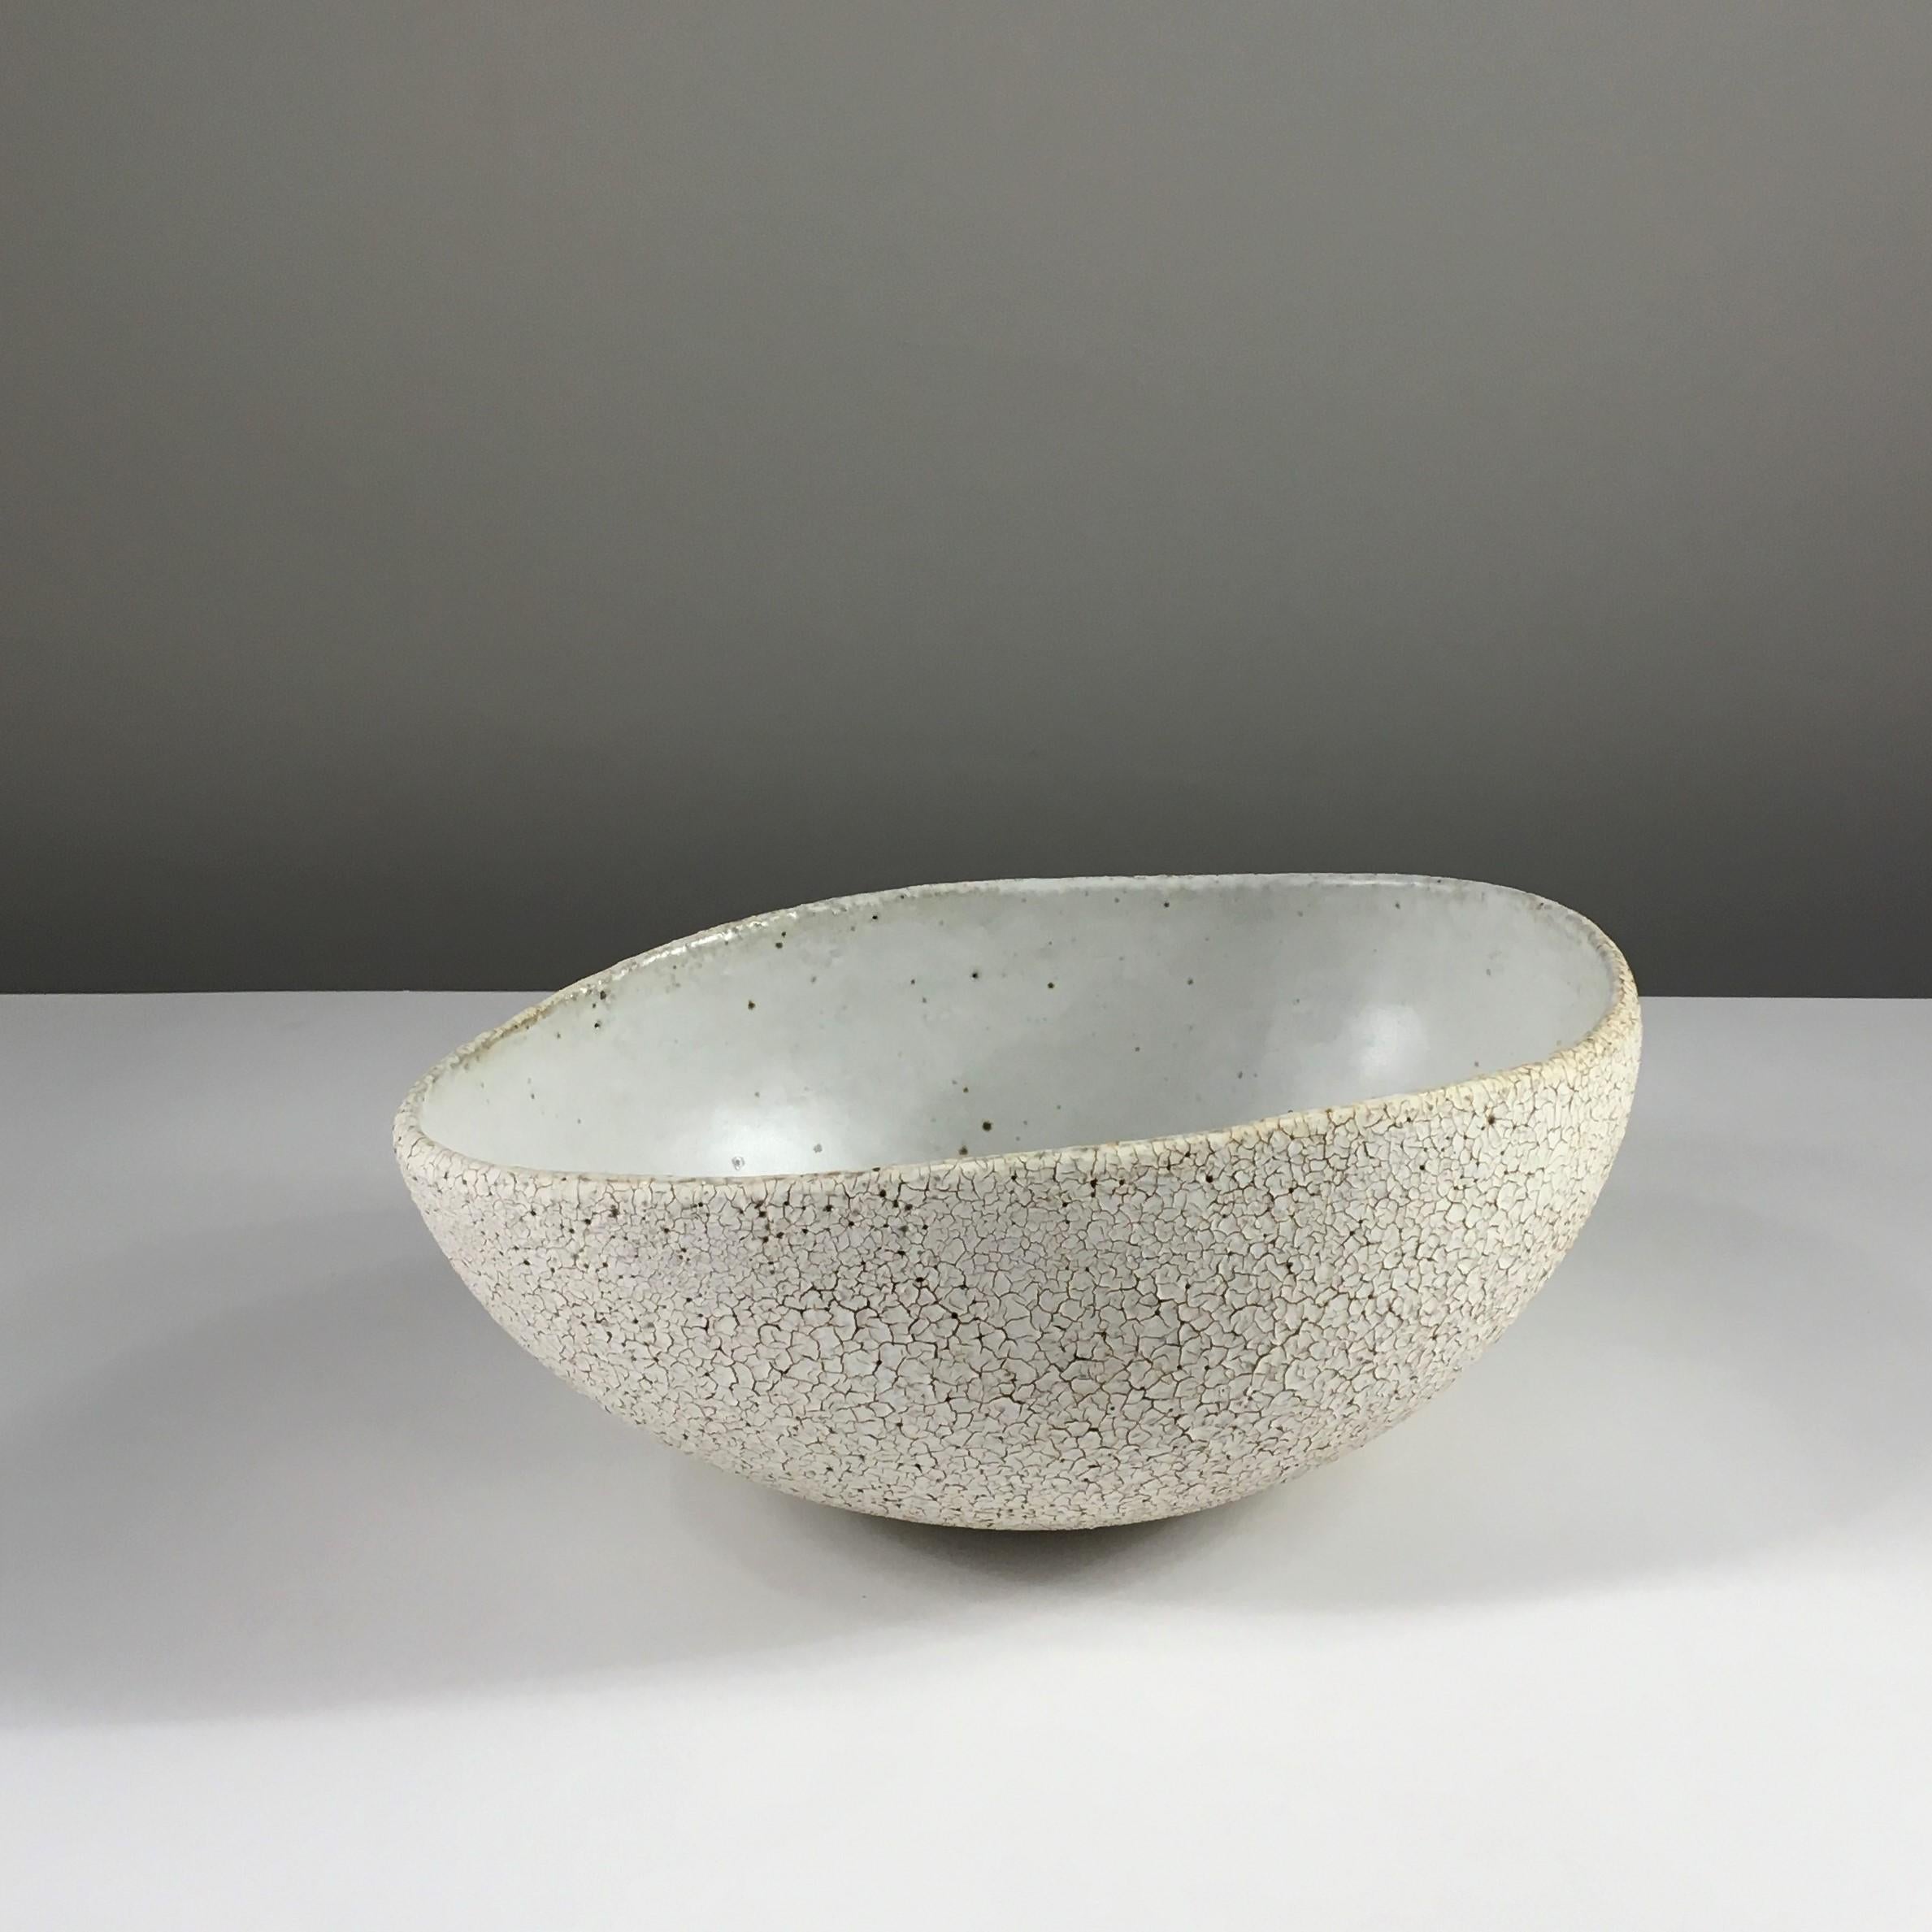 Ceramic Large Bowl with Inner Light Grey Glaze by Yumiko Kuga. Dimensions: W 9